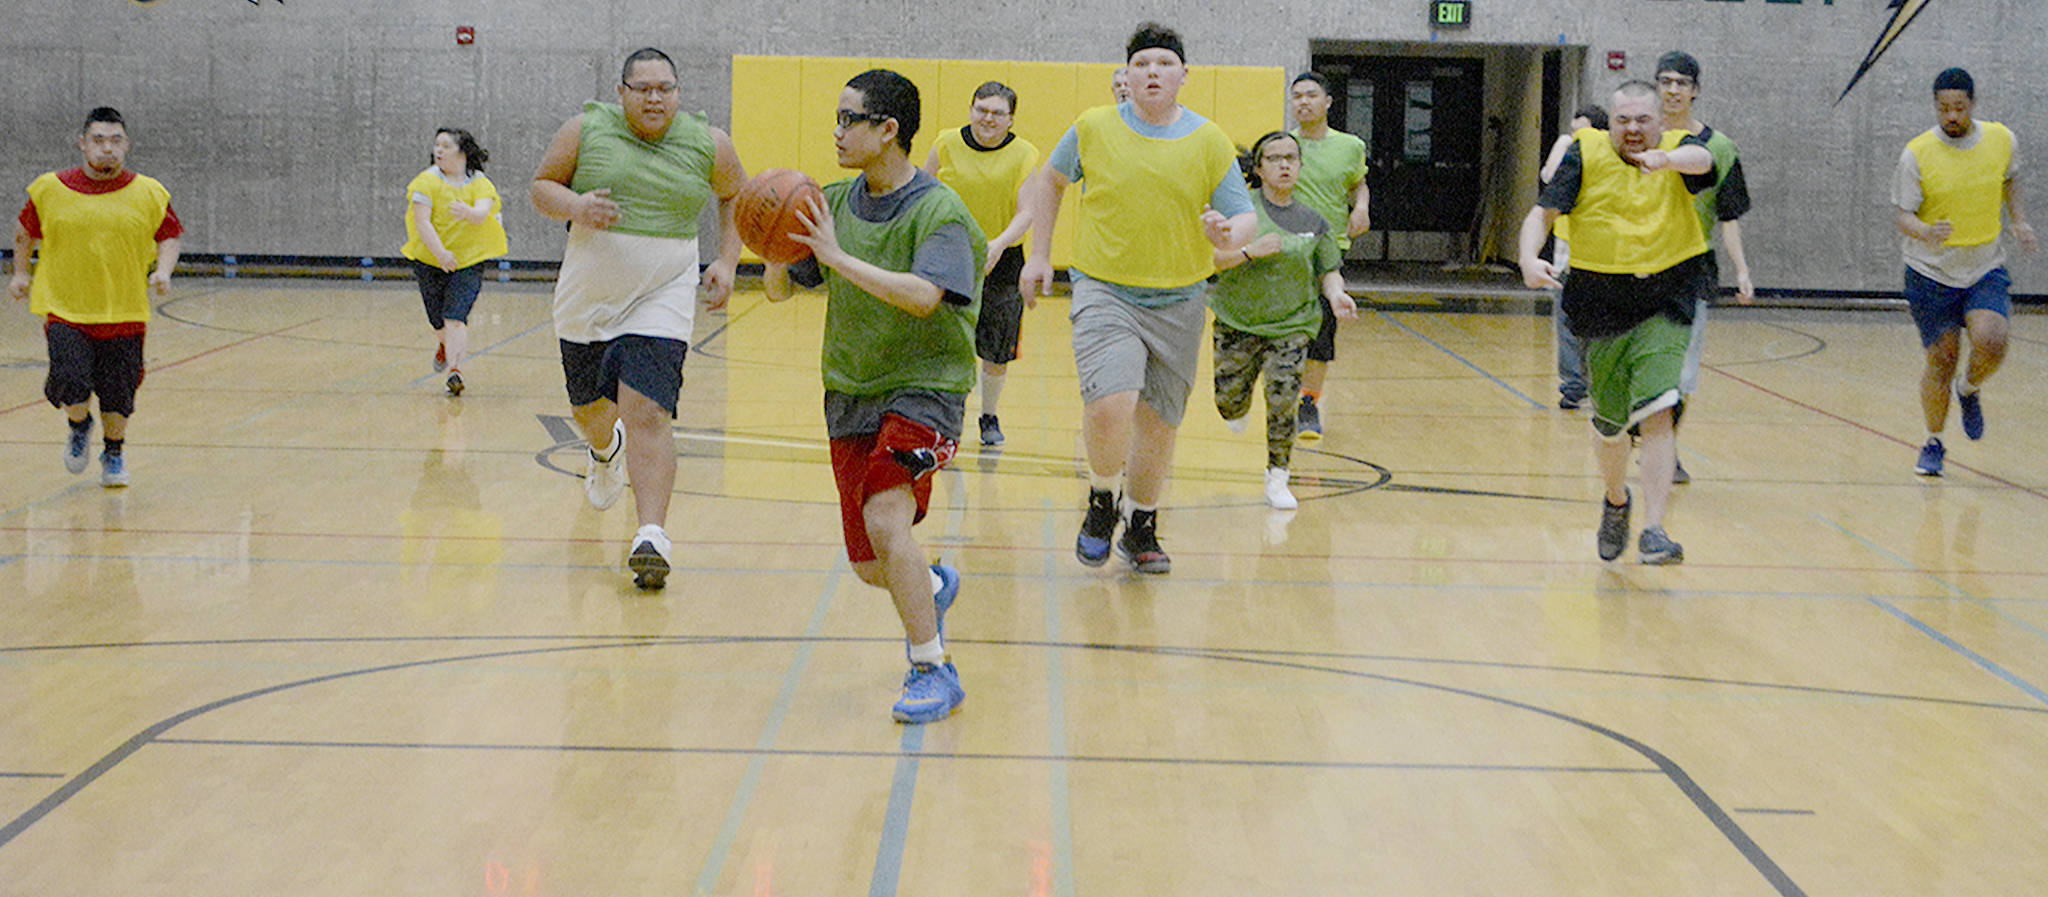 Hoops for Hope a fun fundraiser for special needs students